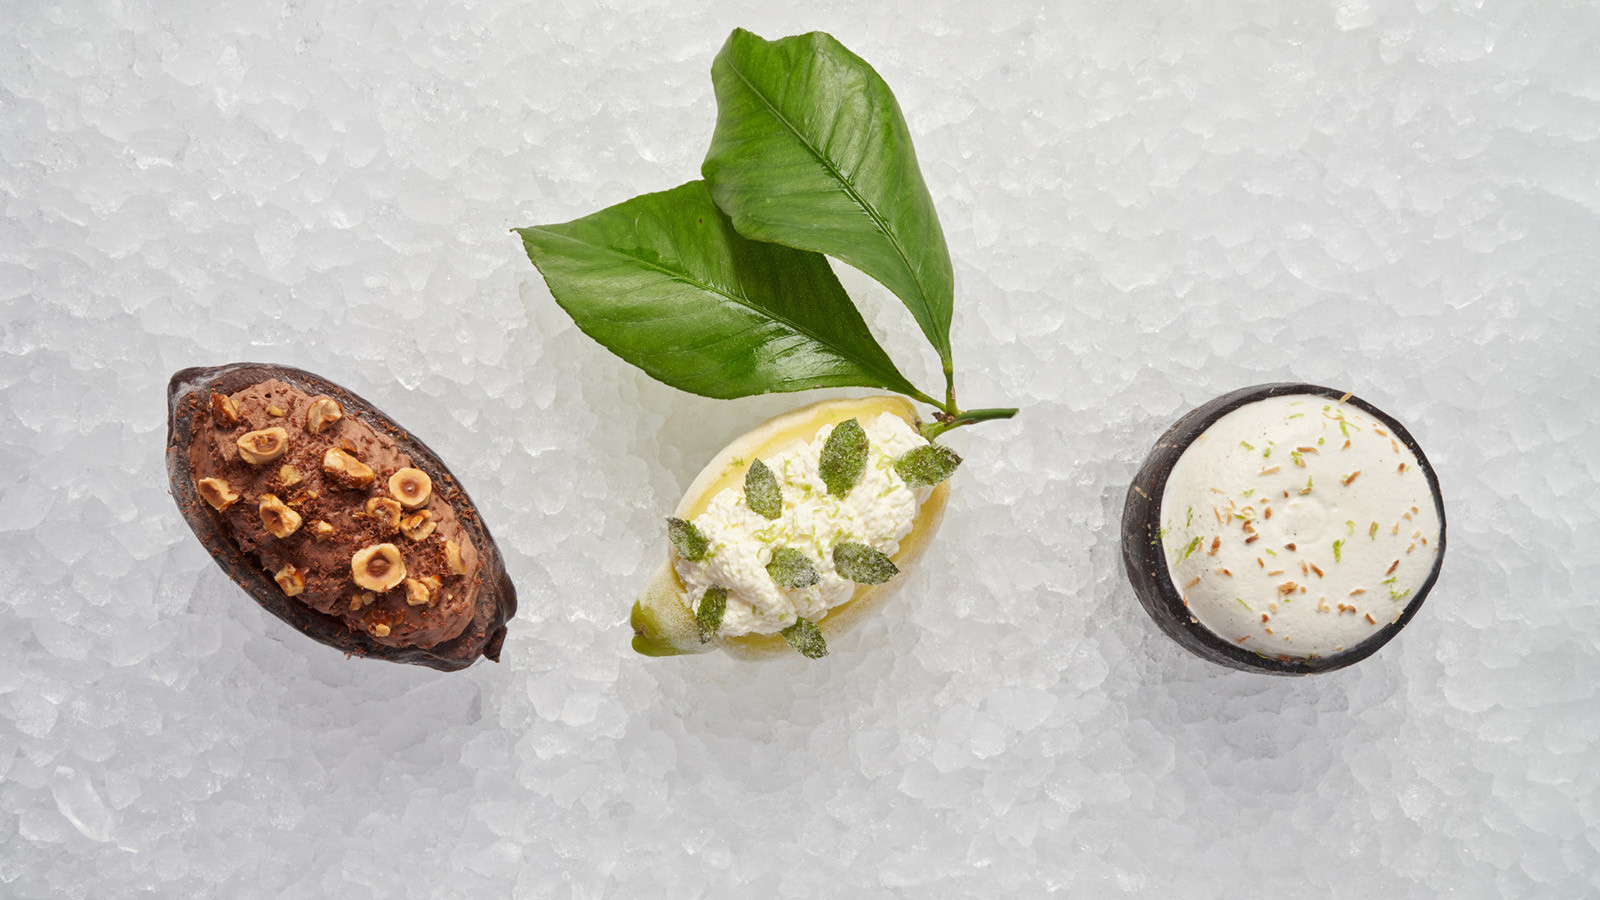 news-main-pastry-chef-florent-margaillan-launches-handcrafted-frosted-fruits-at-grand-hotel-du-cap-ferrat-a-four-seasons-hotel.1567009846.jpg